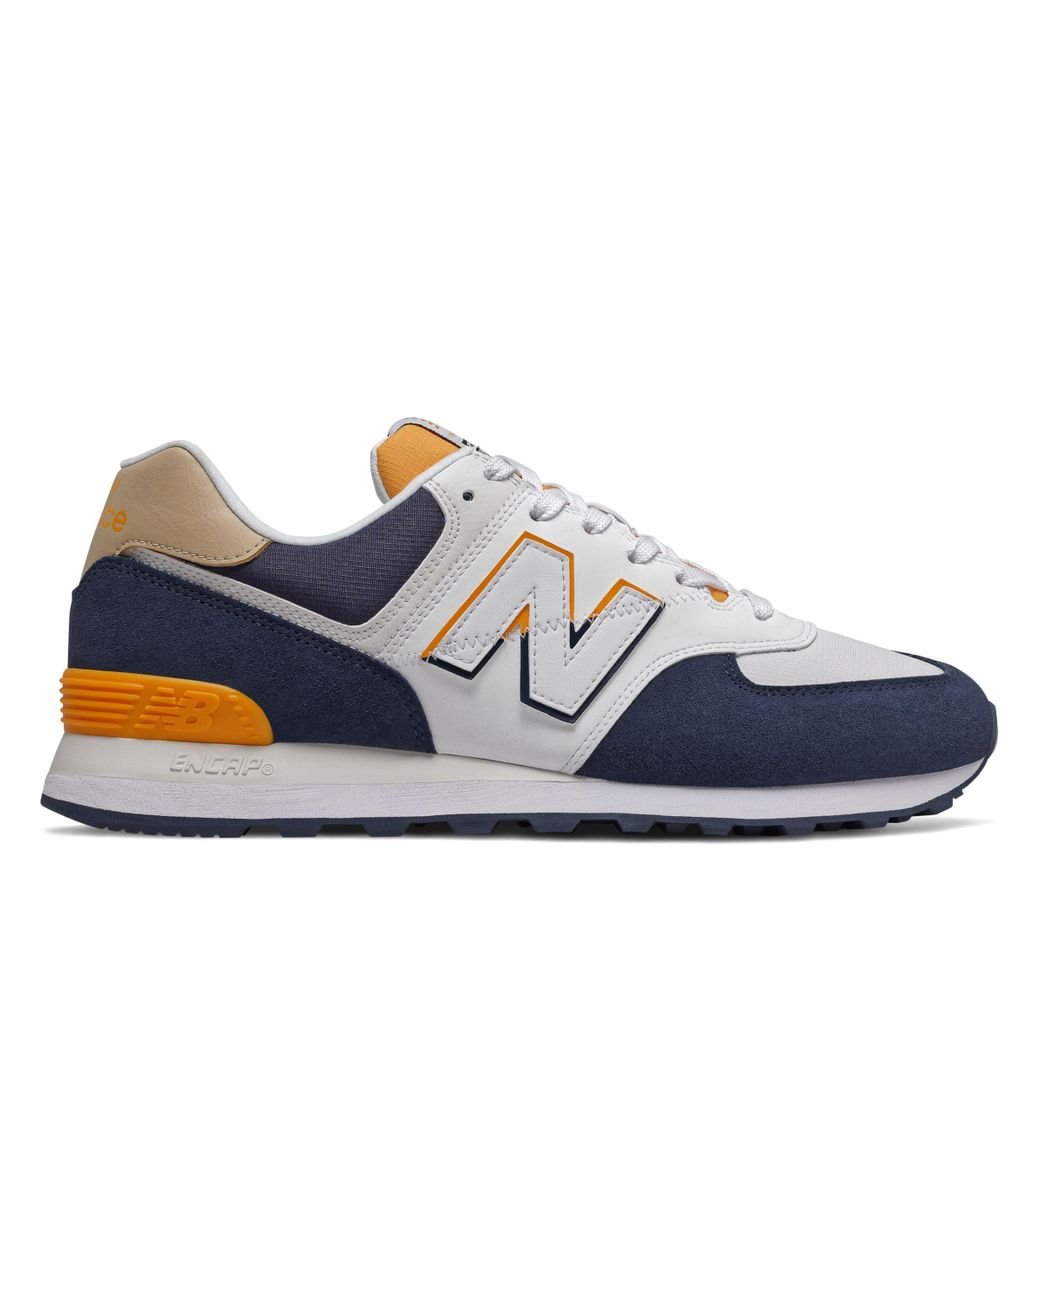 New Balance 574 Running Classics Shoes in Navy/Yellow (Blue) for Men - Lyst